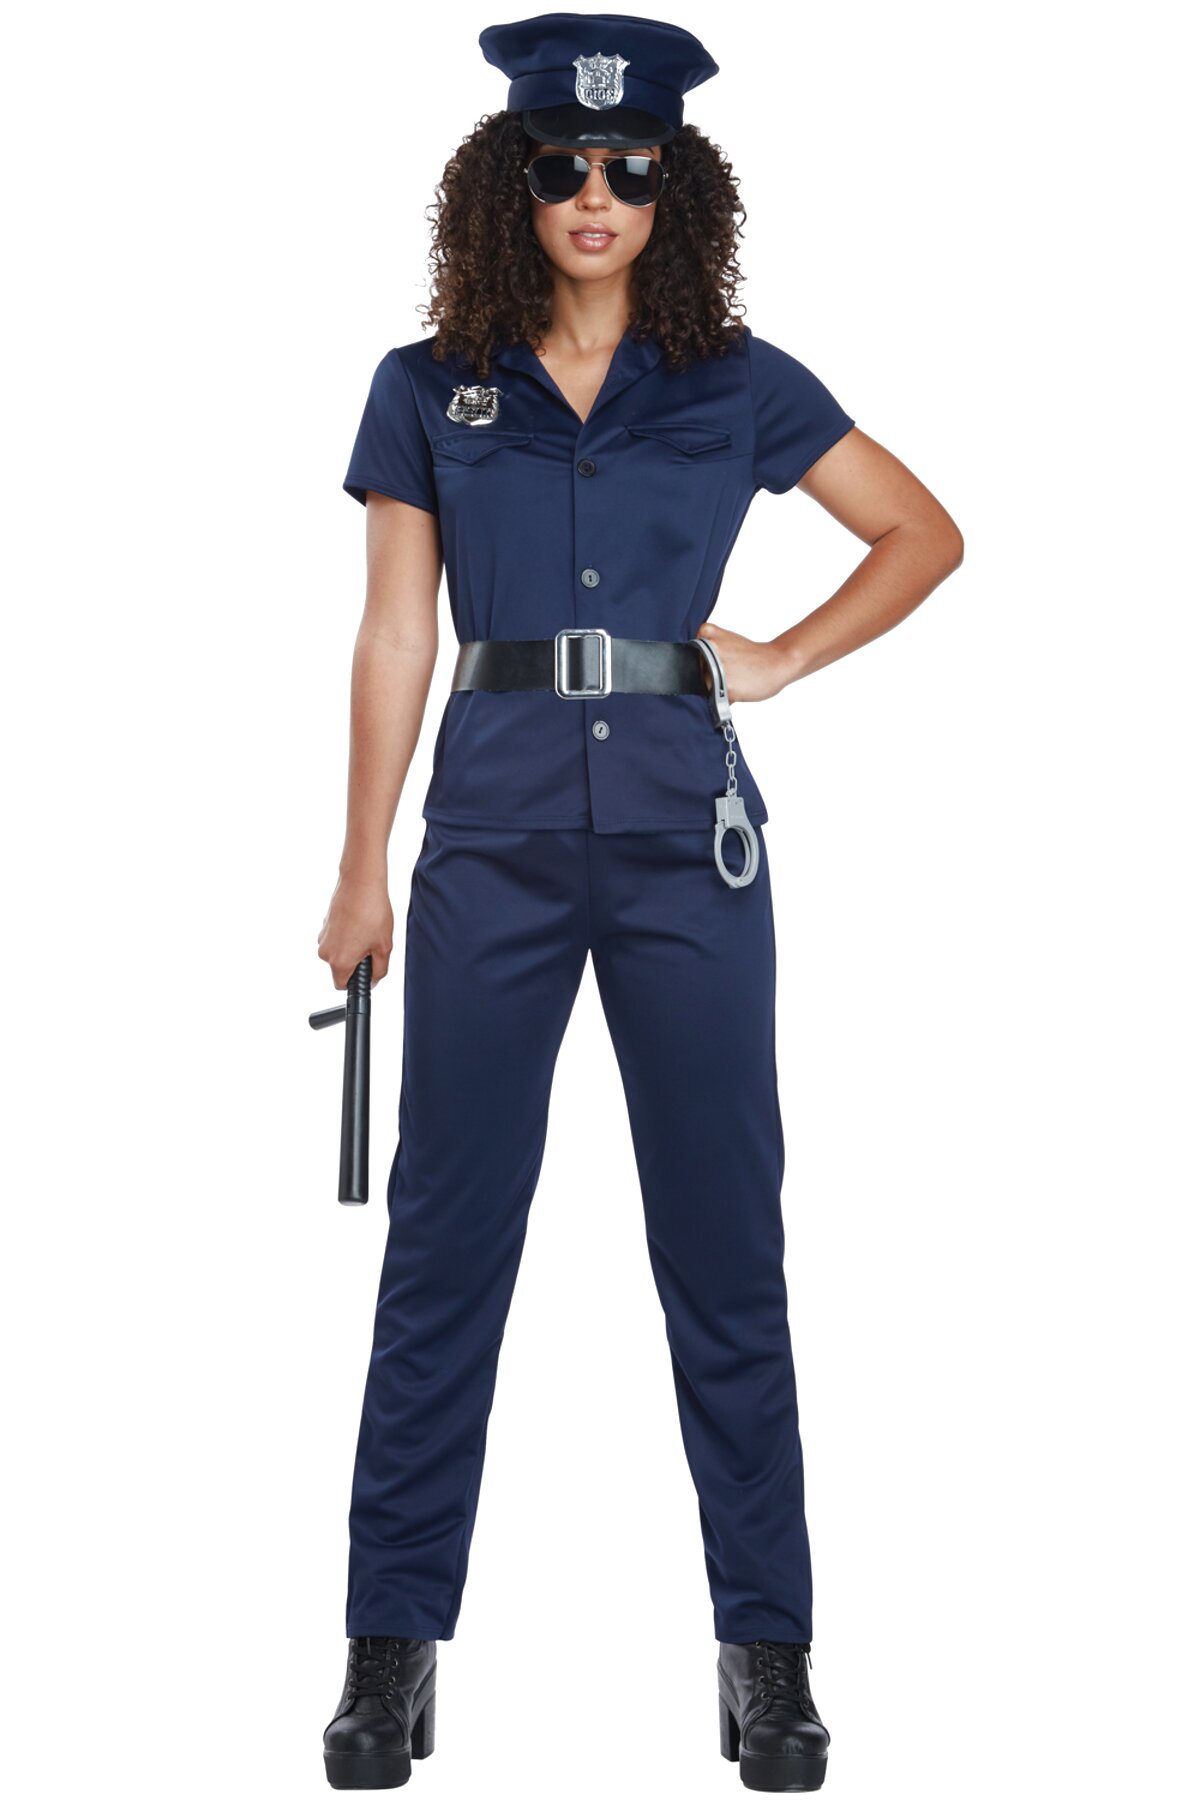 Police Woman Uniform for sale in UK | 60 used Police Woman Uniforms